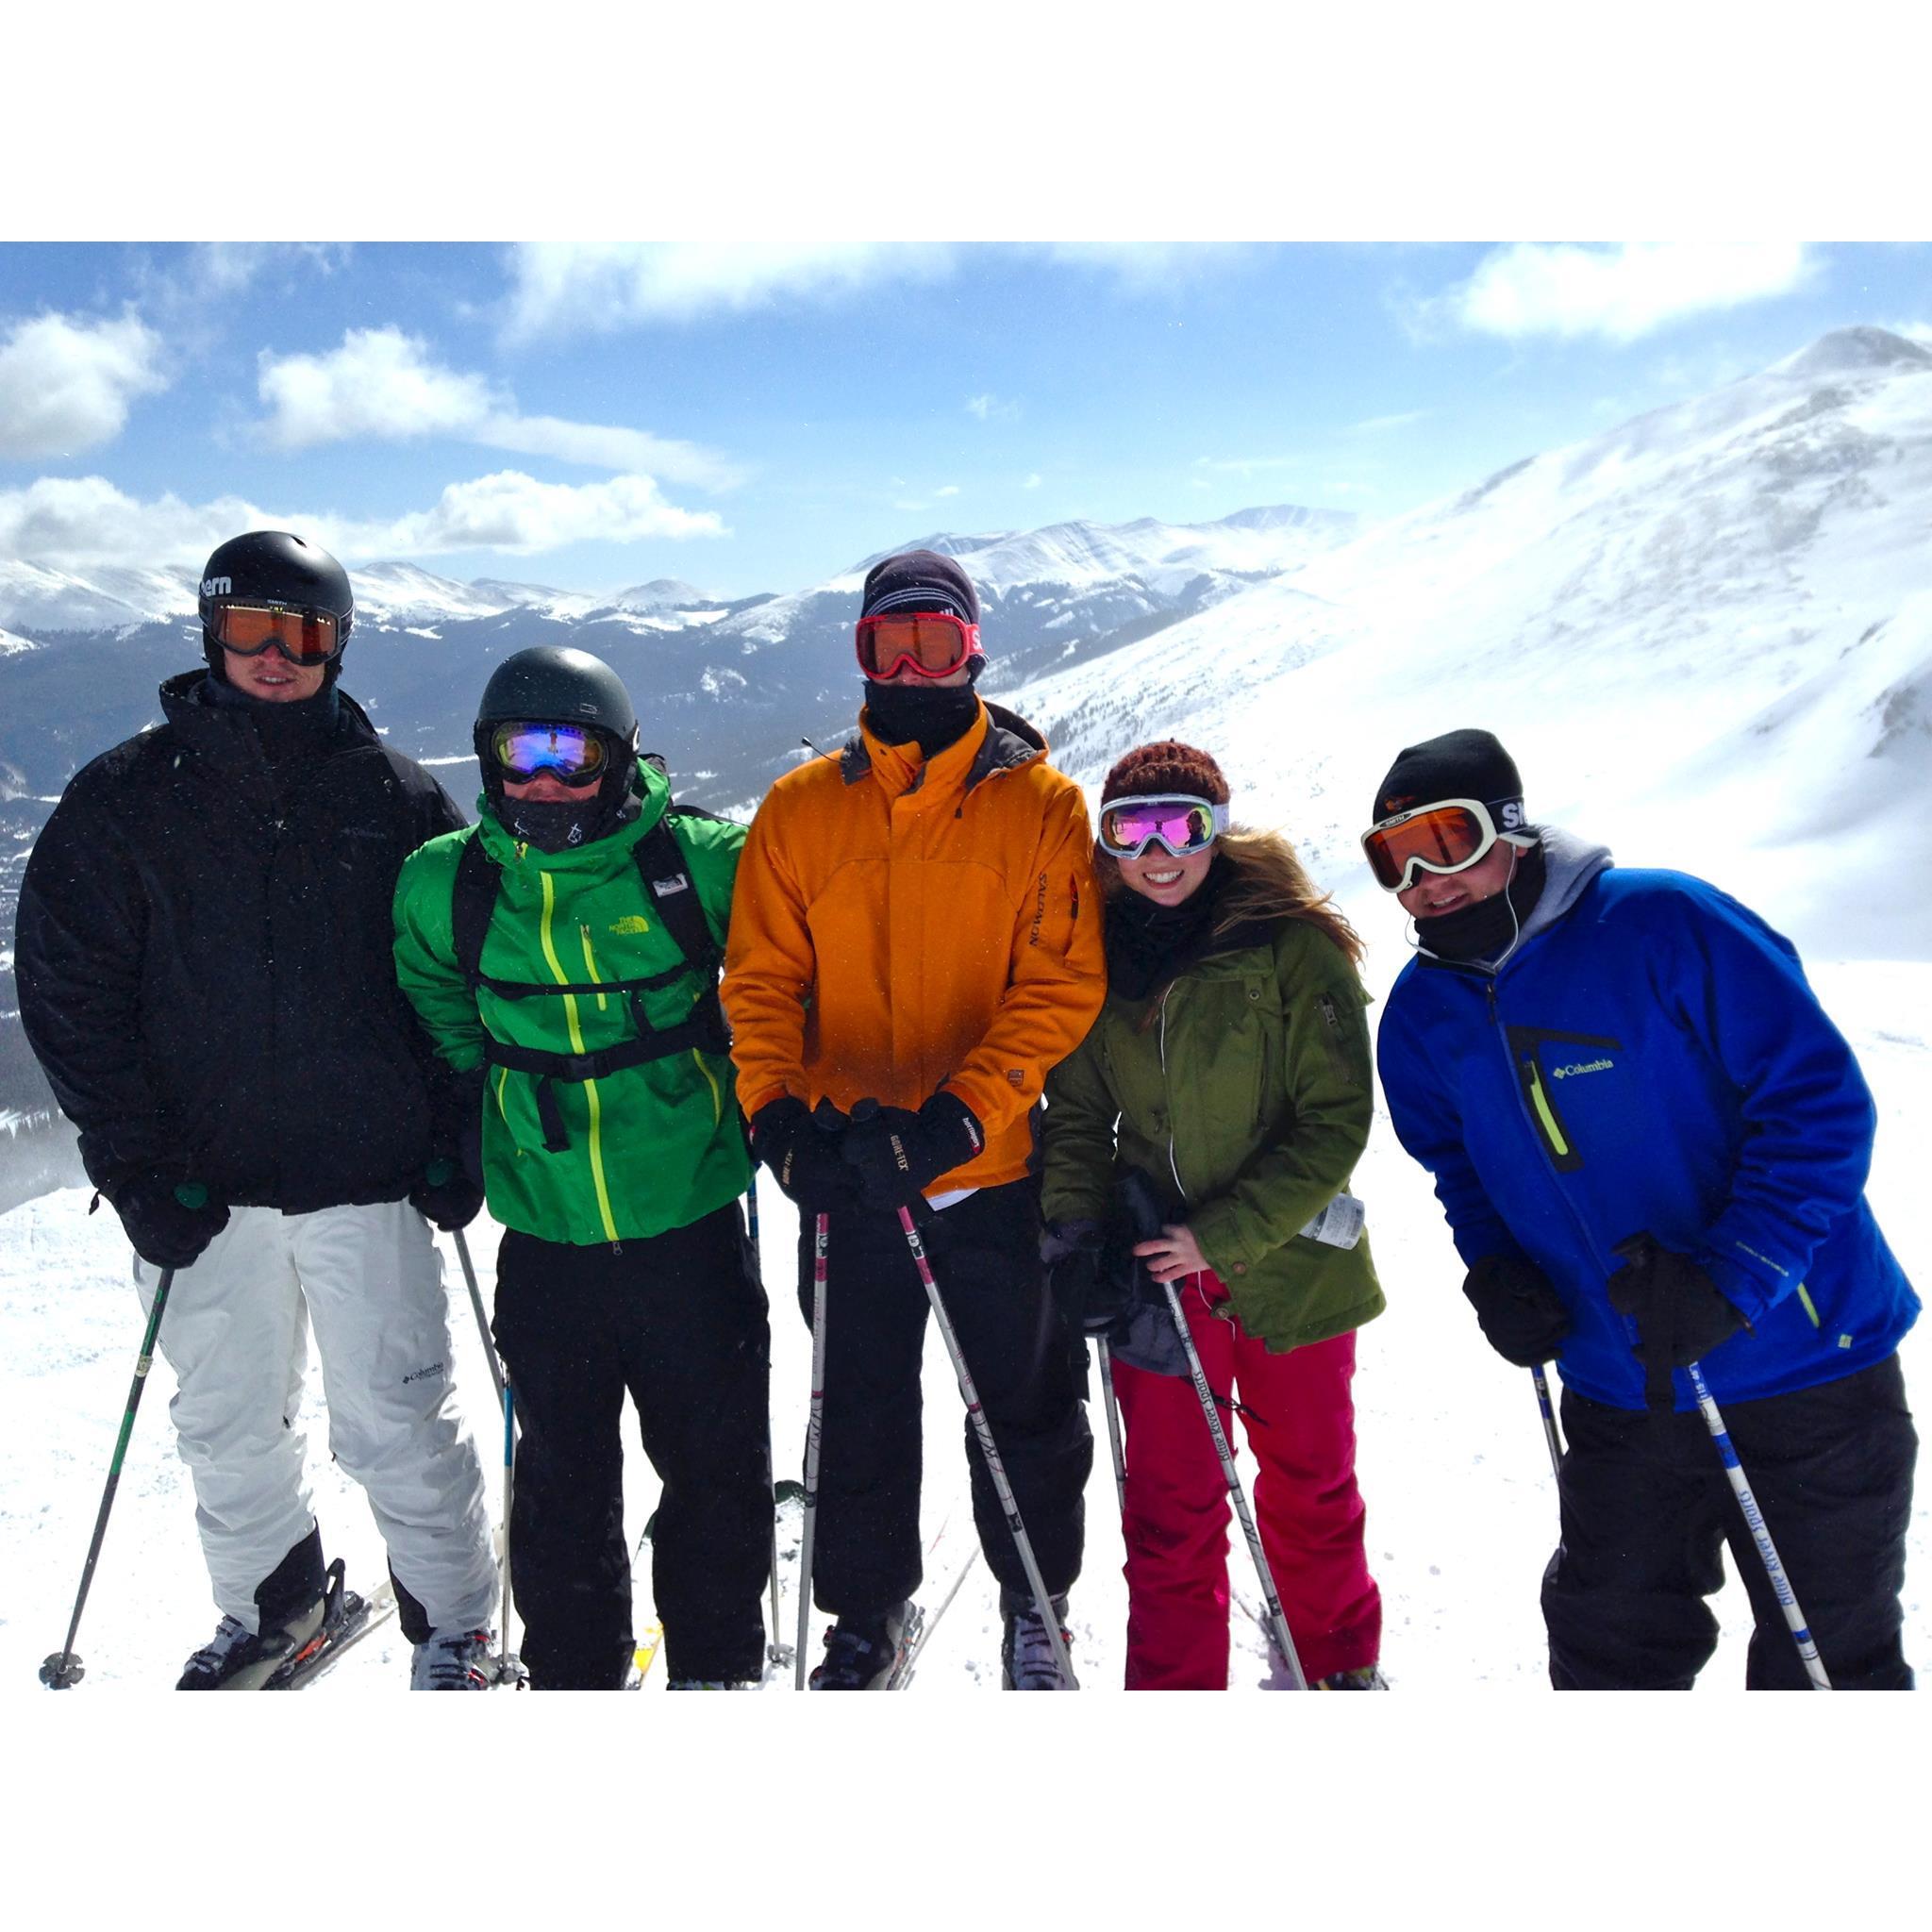 Breckenridge Spring Break with Connor, Spencer, Billy, and Jacob (not pictured) (2014)